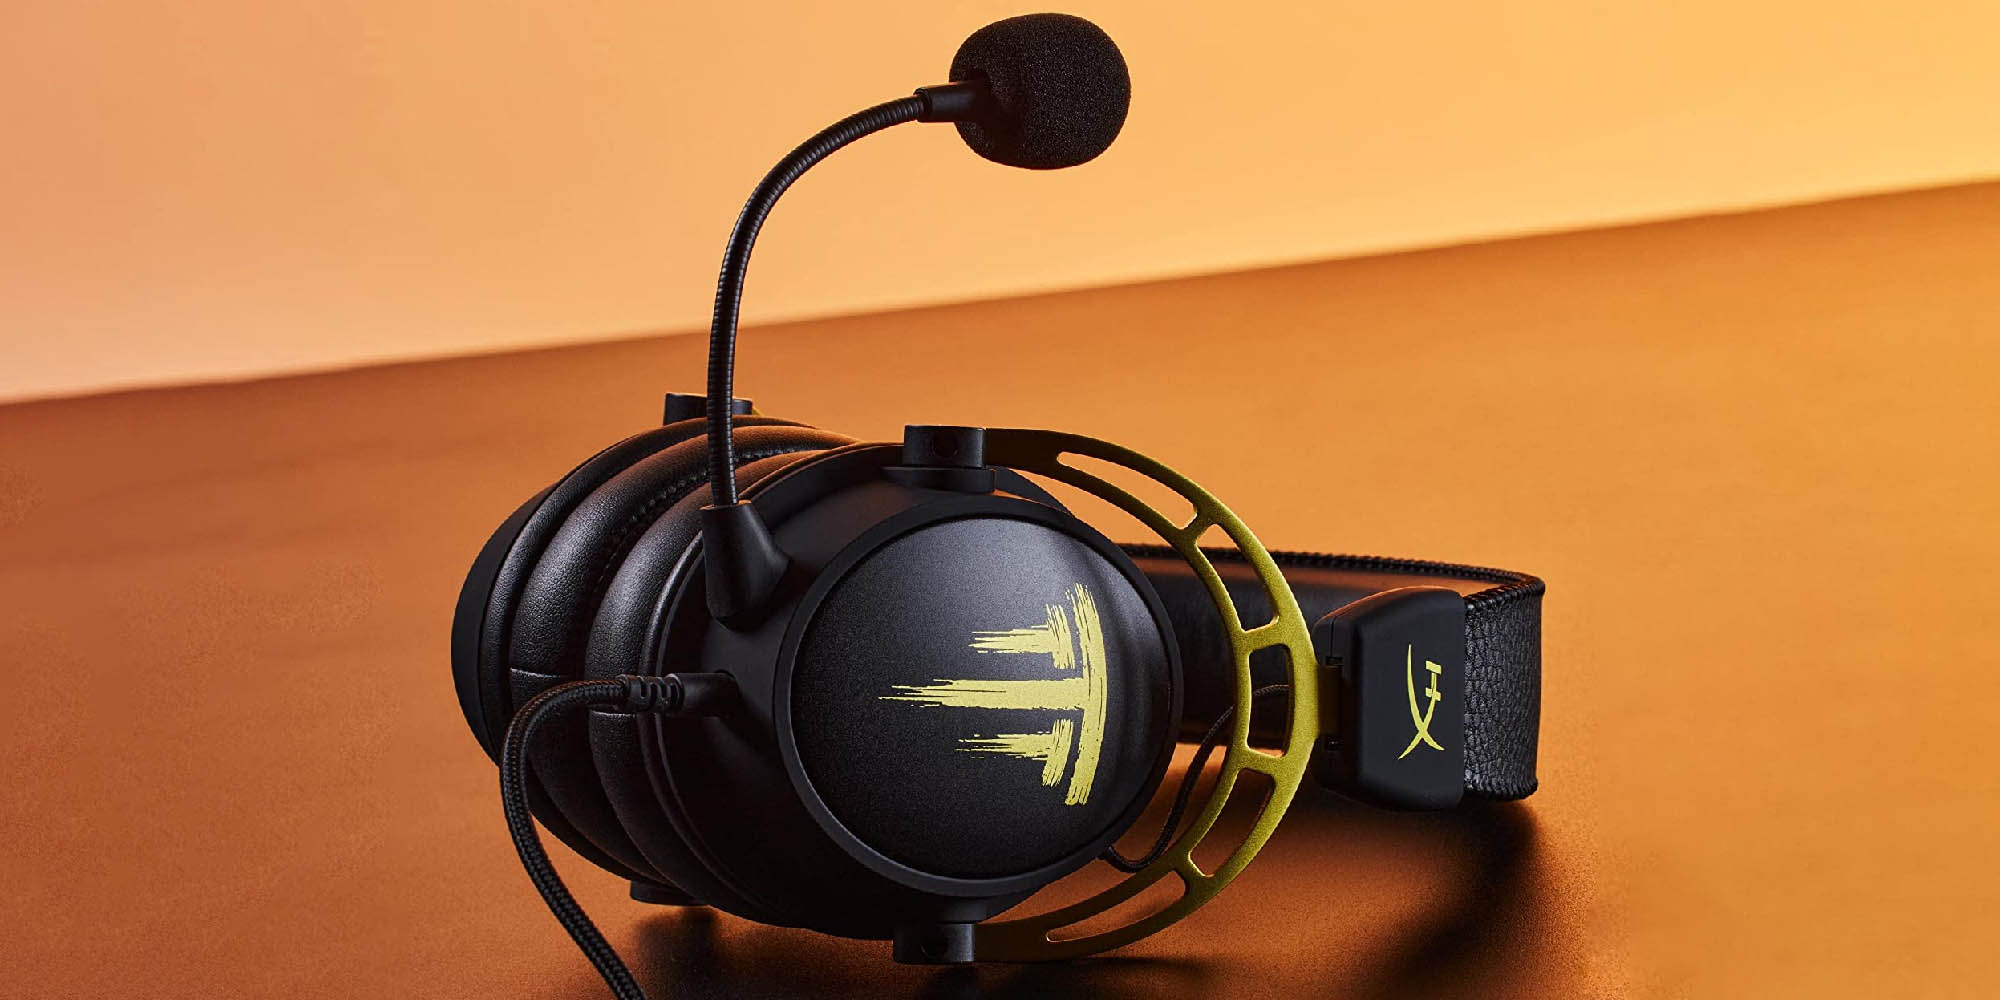 banana Reassure toothache HyperX's TimTheTatMan Edition Cloud Alpha Gaming Headset sees first price  drop to $80